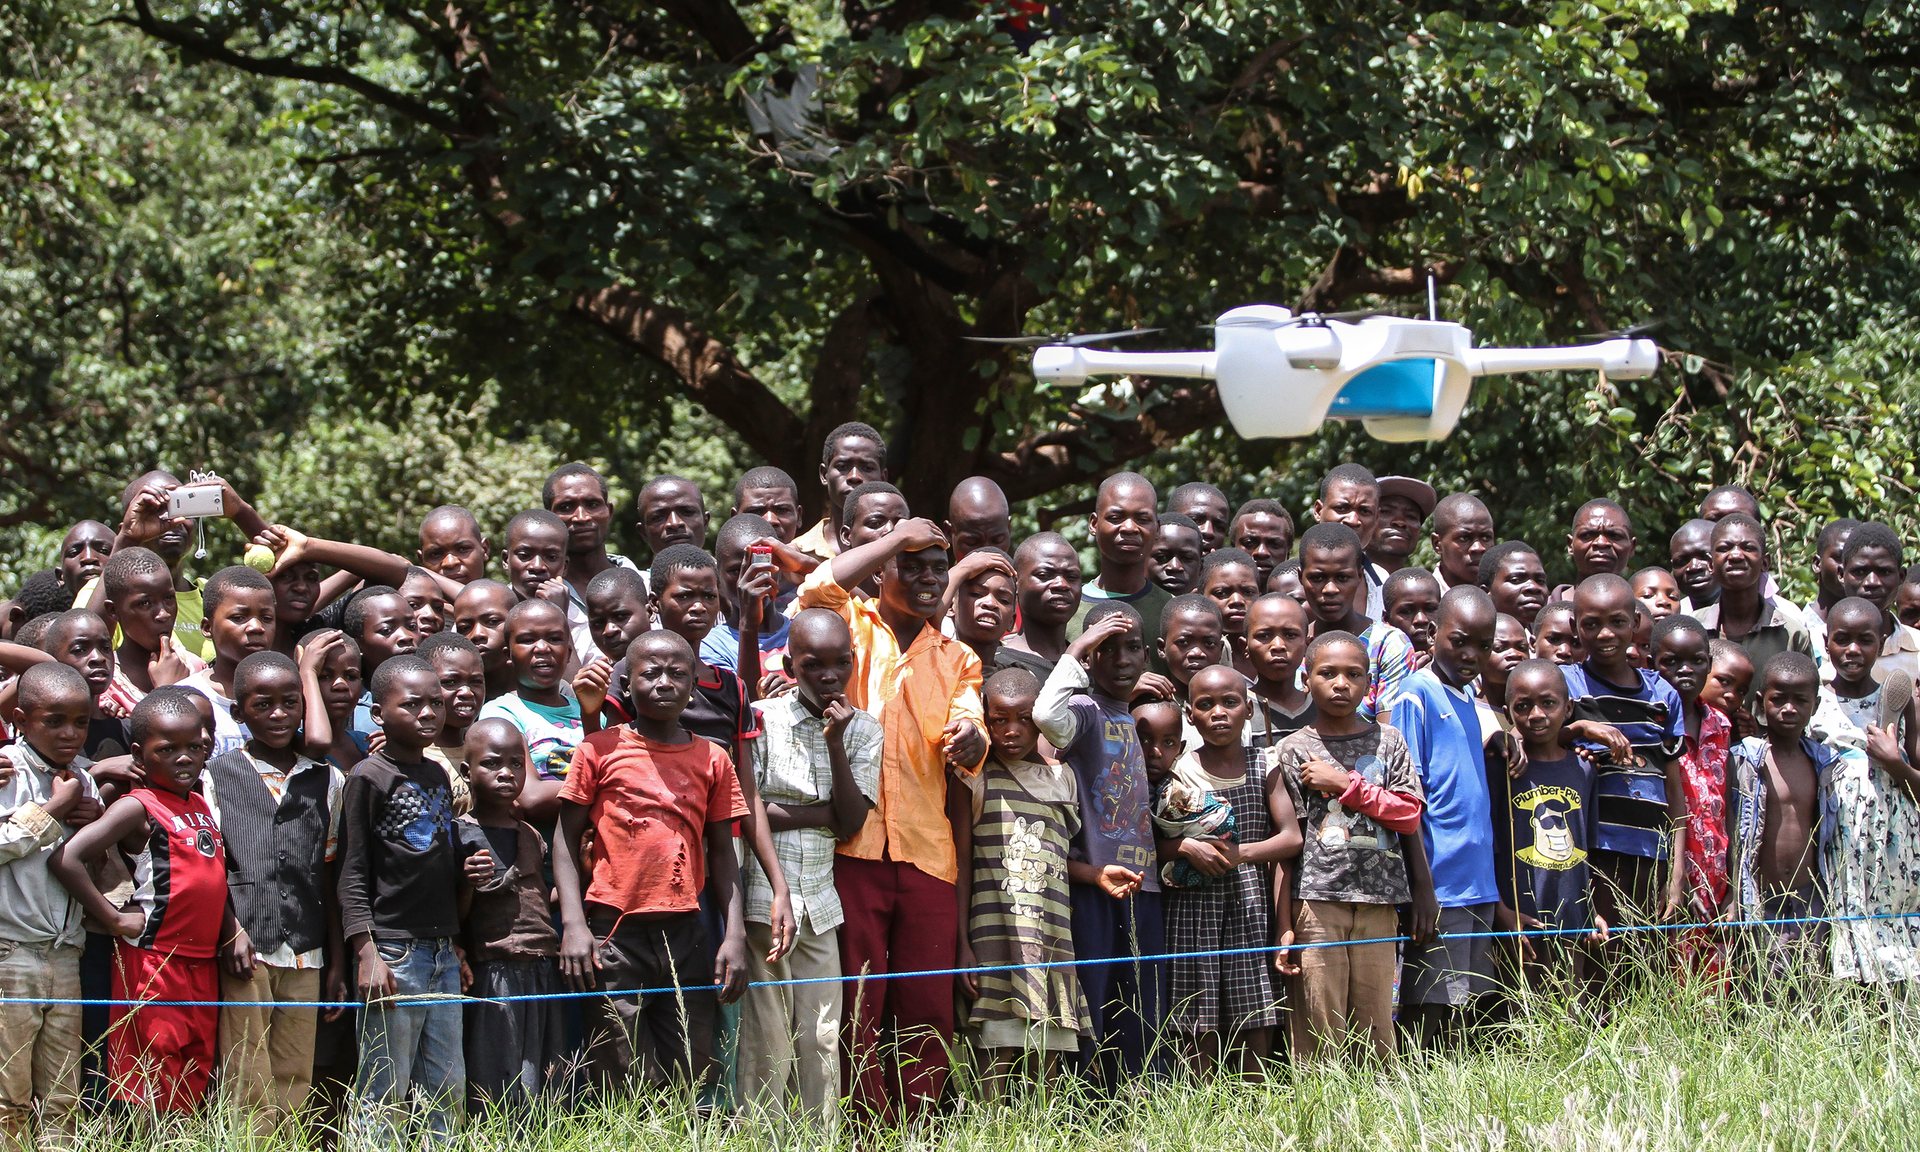 Children look on in astonishment as a drone is put through its paces at a community demonstration in Lilongwe. The Malawian government could use drones to reduce waiting times for medical tests. Photograph: Bodole/Unicef